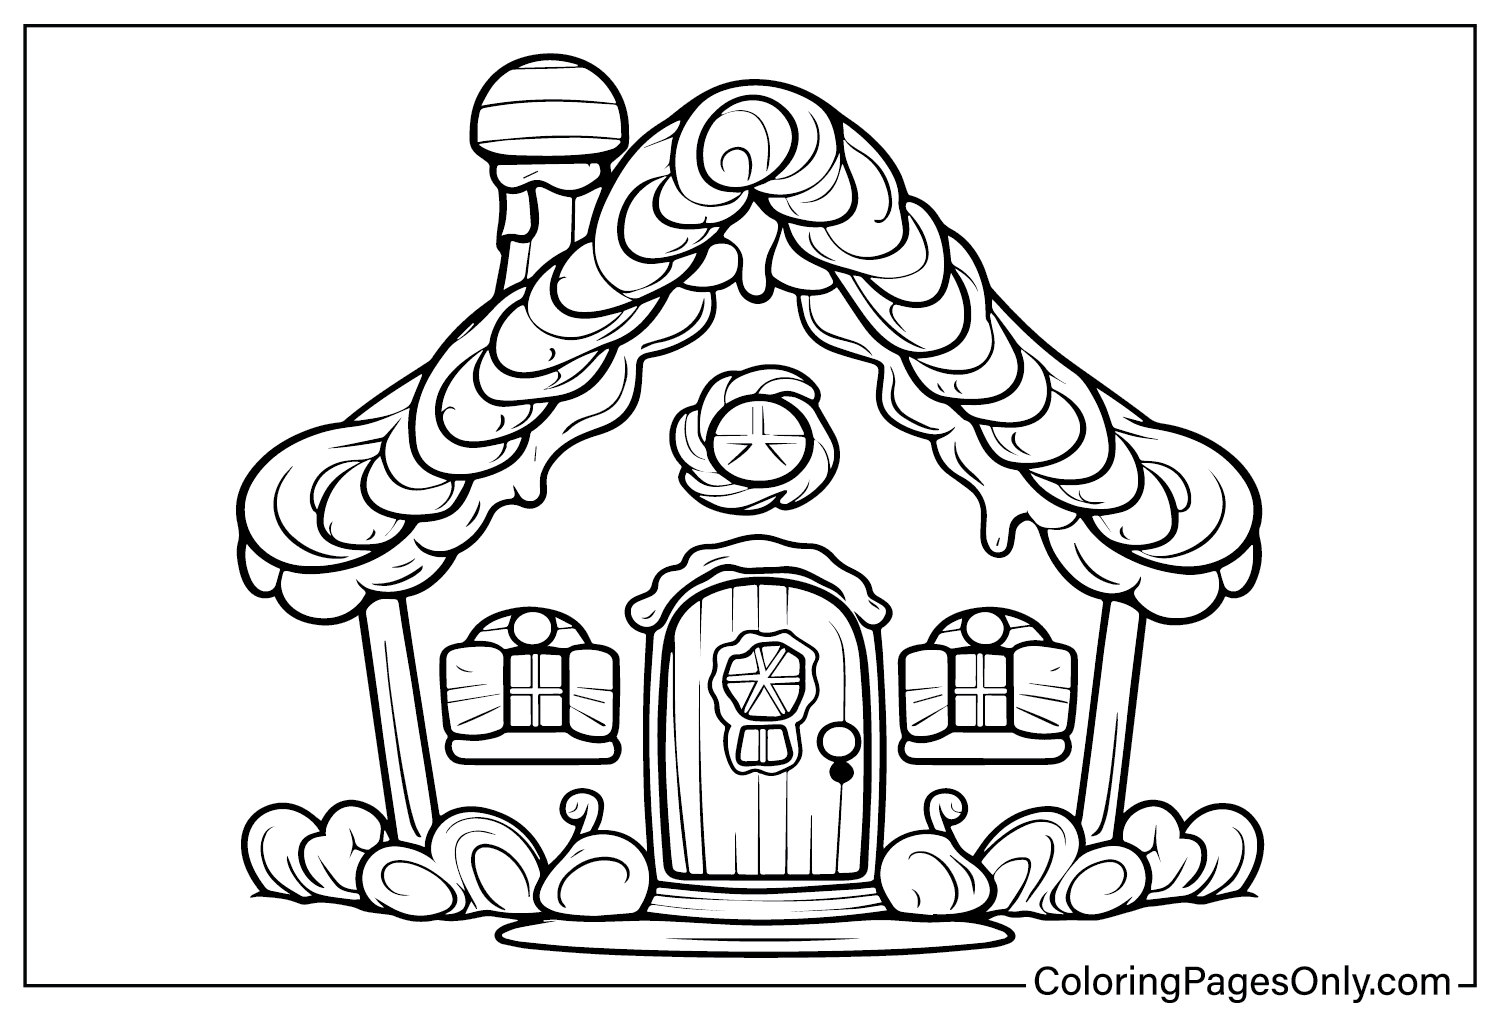 A Gingerbread House Coloring Page from Gingerbread House